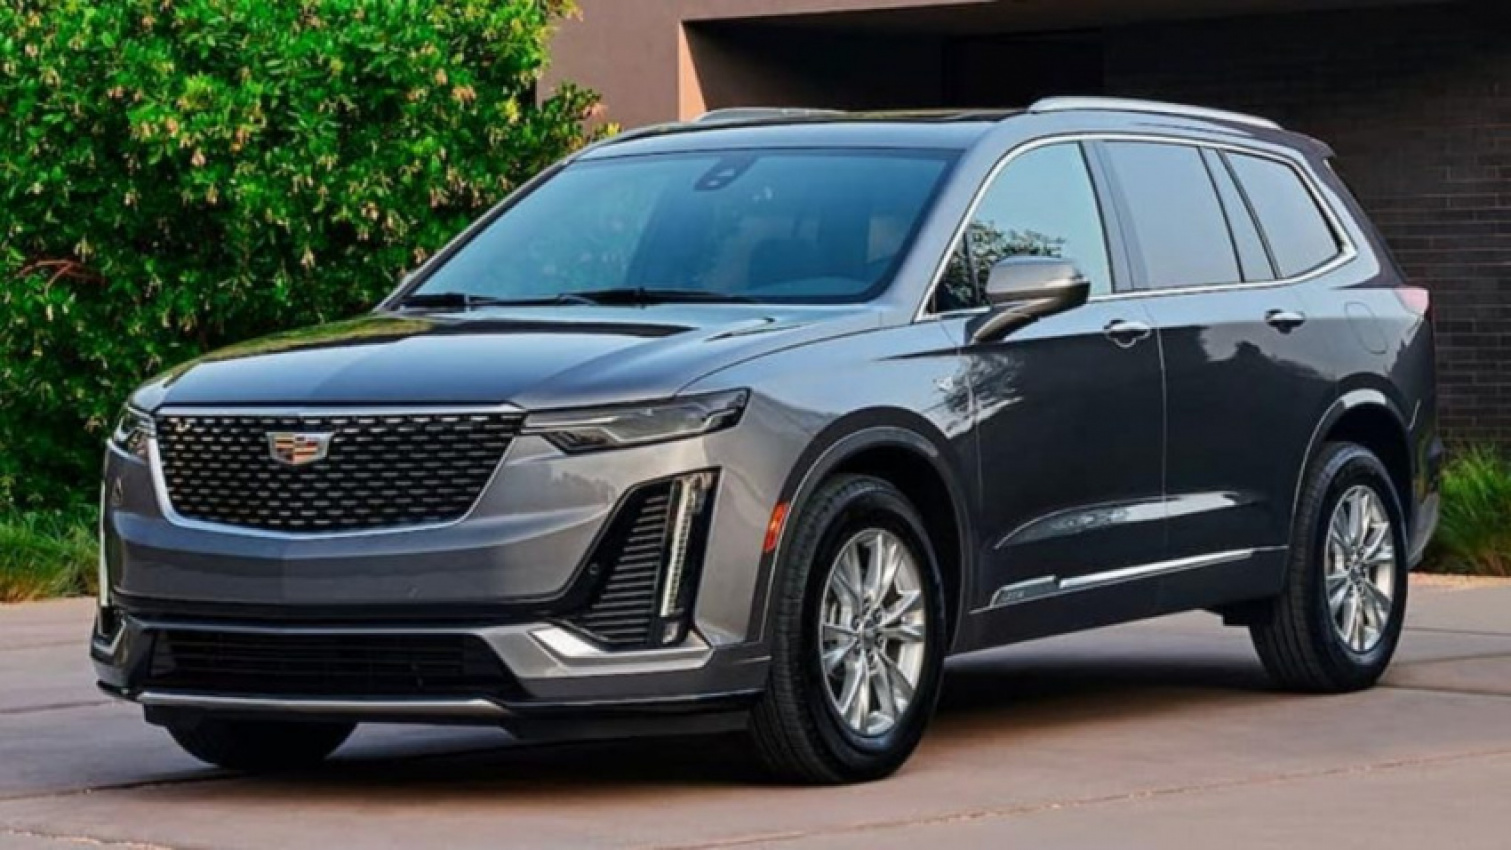 autos, cadillac, cars, consumer reports, consumer reports only recommends 1 cadillac model for 2022